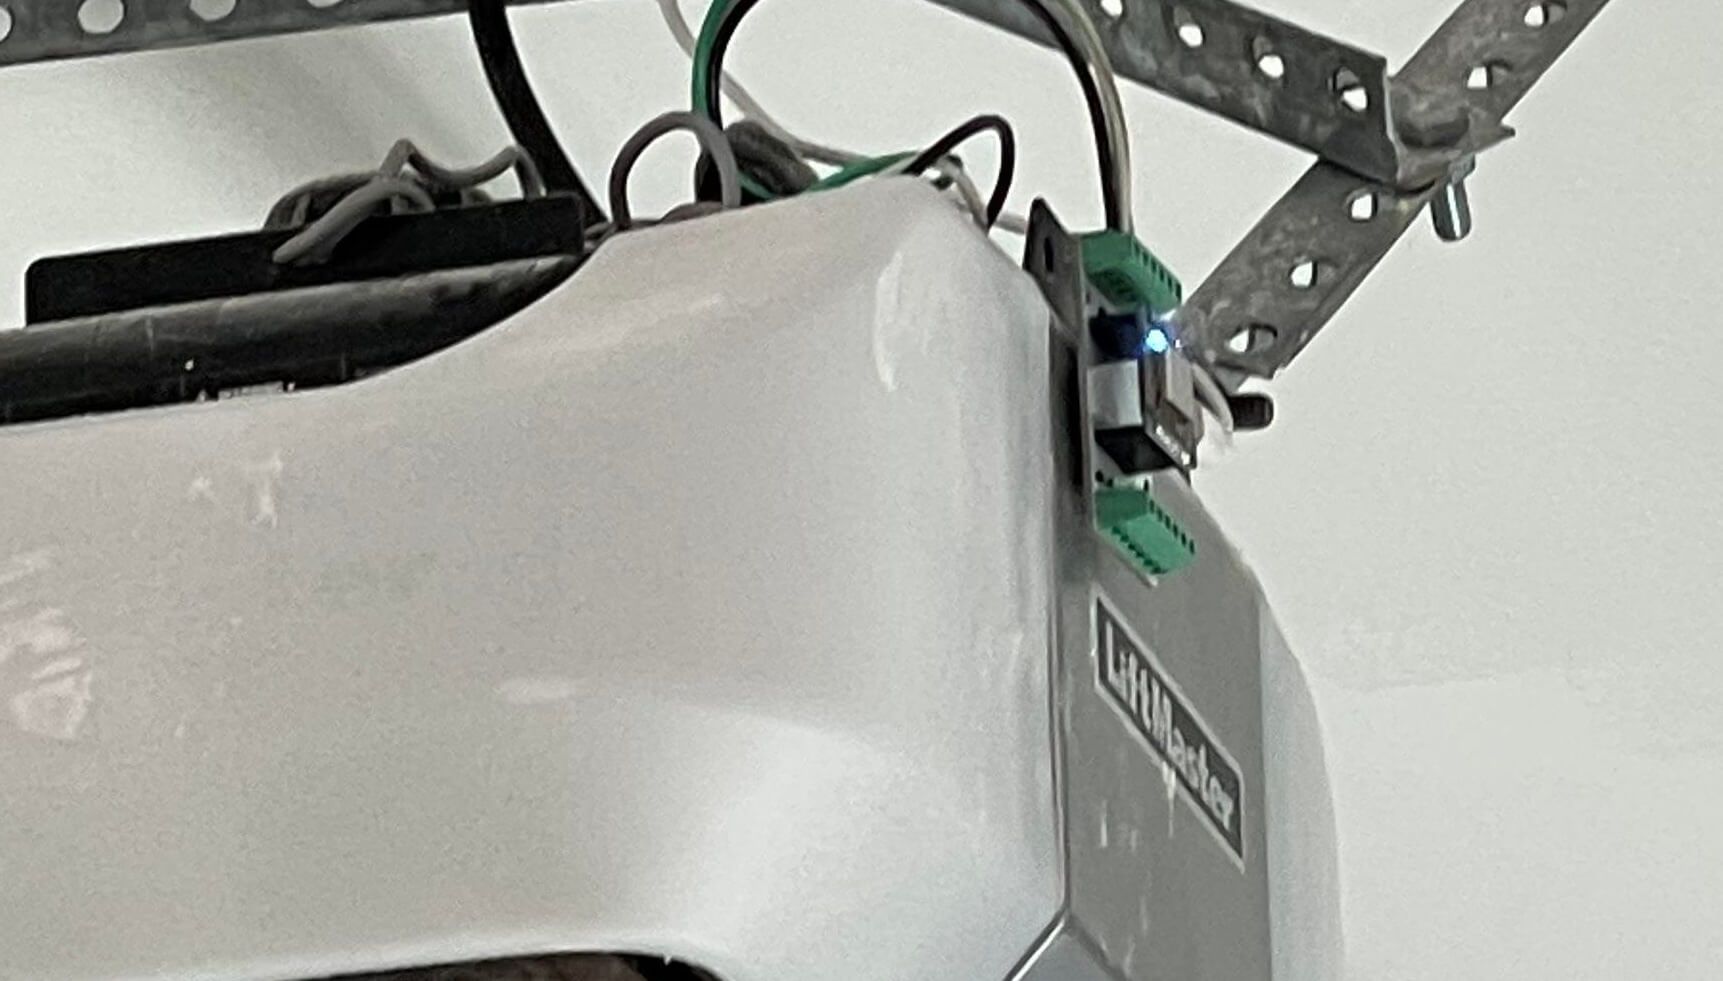 Photo of a LiftMaster garage door opener with an extension board attached to it.